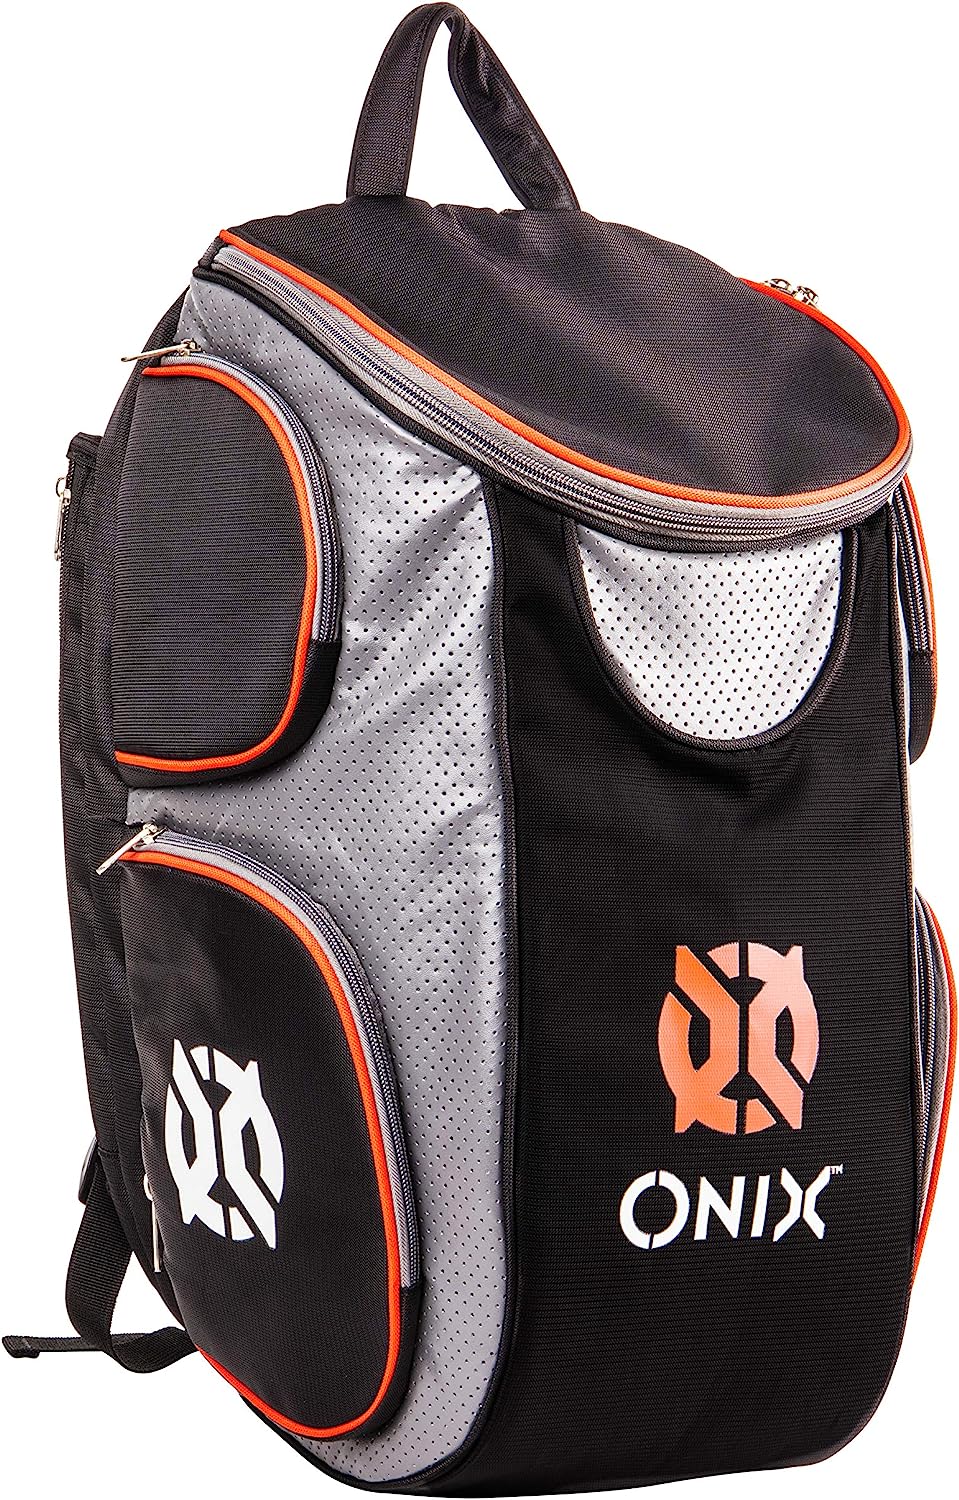 The Best Pickleball Backpacks and Bags - Onix